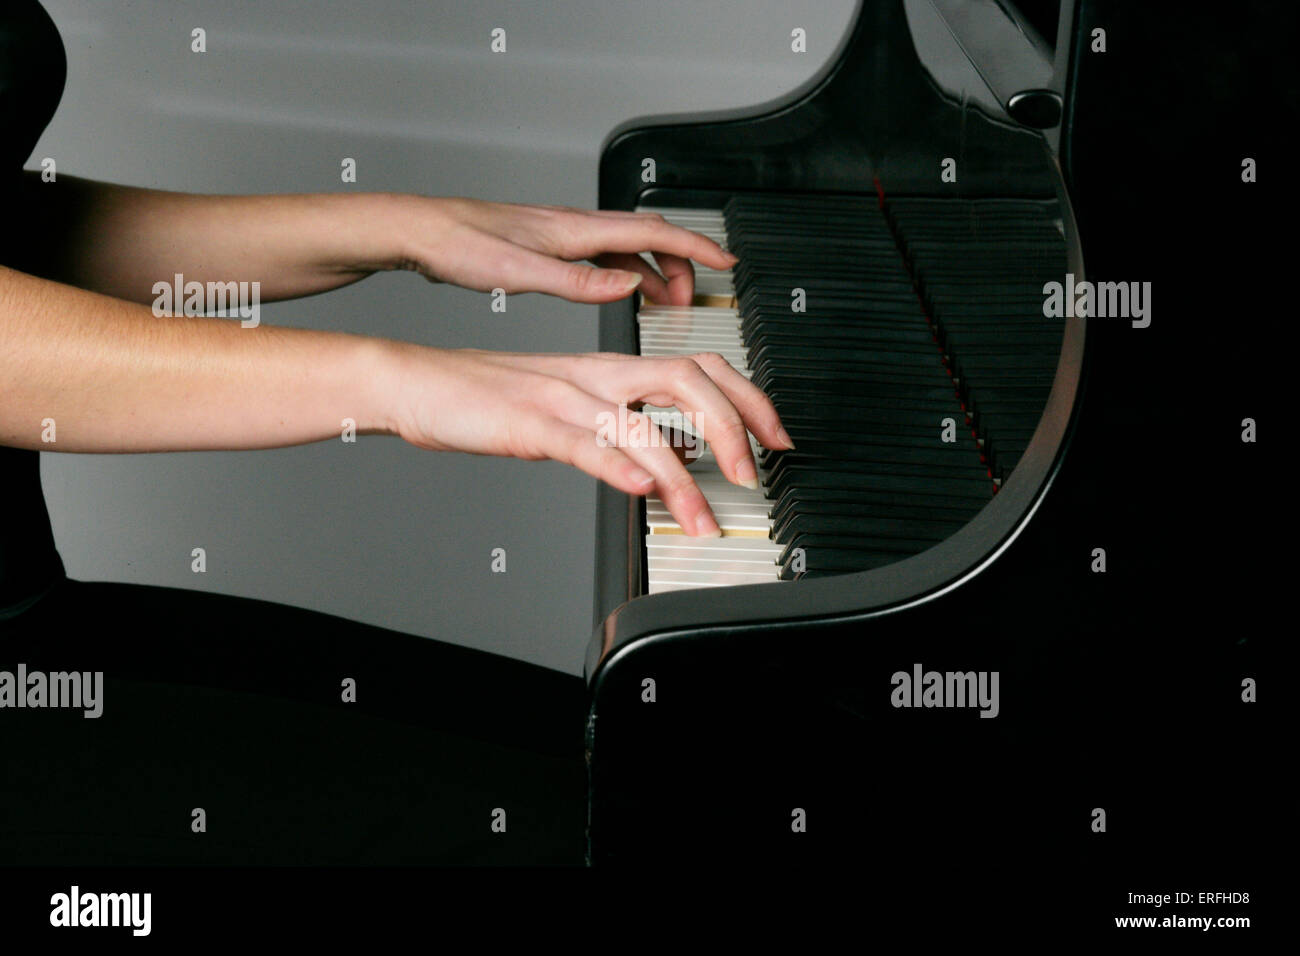 Piano - close-up of a female pianist 's hands on the keyboard. Stock Photo